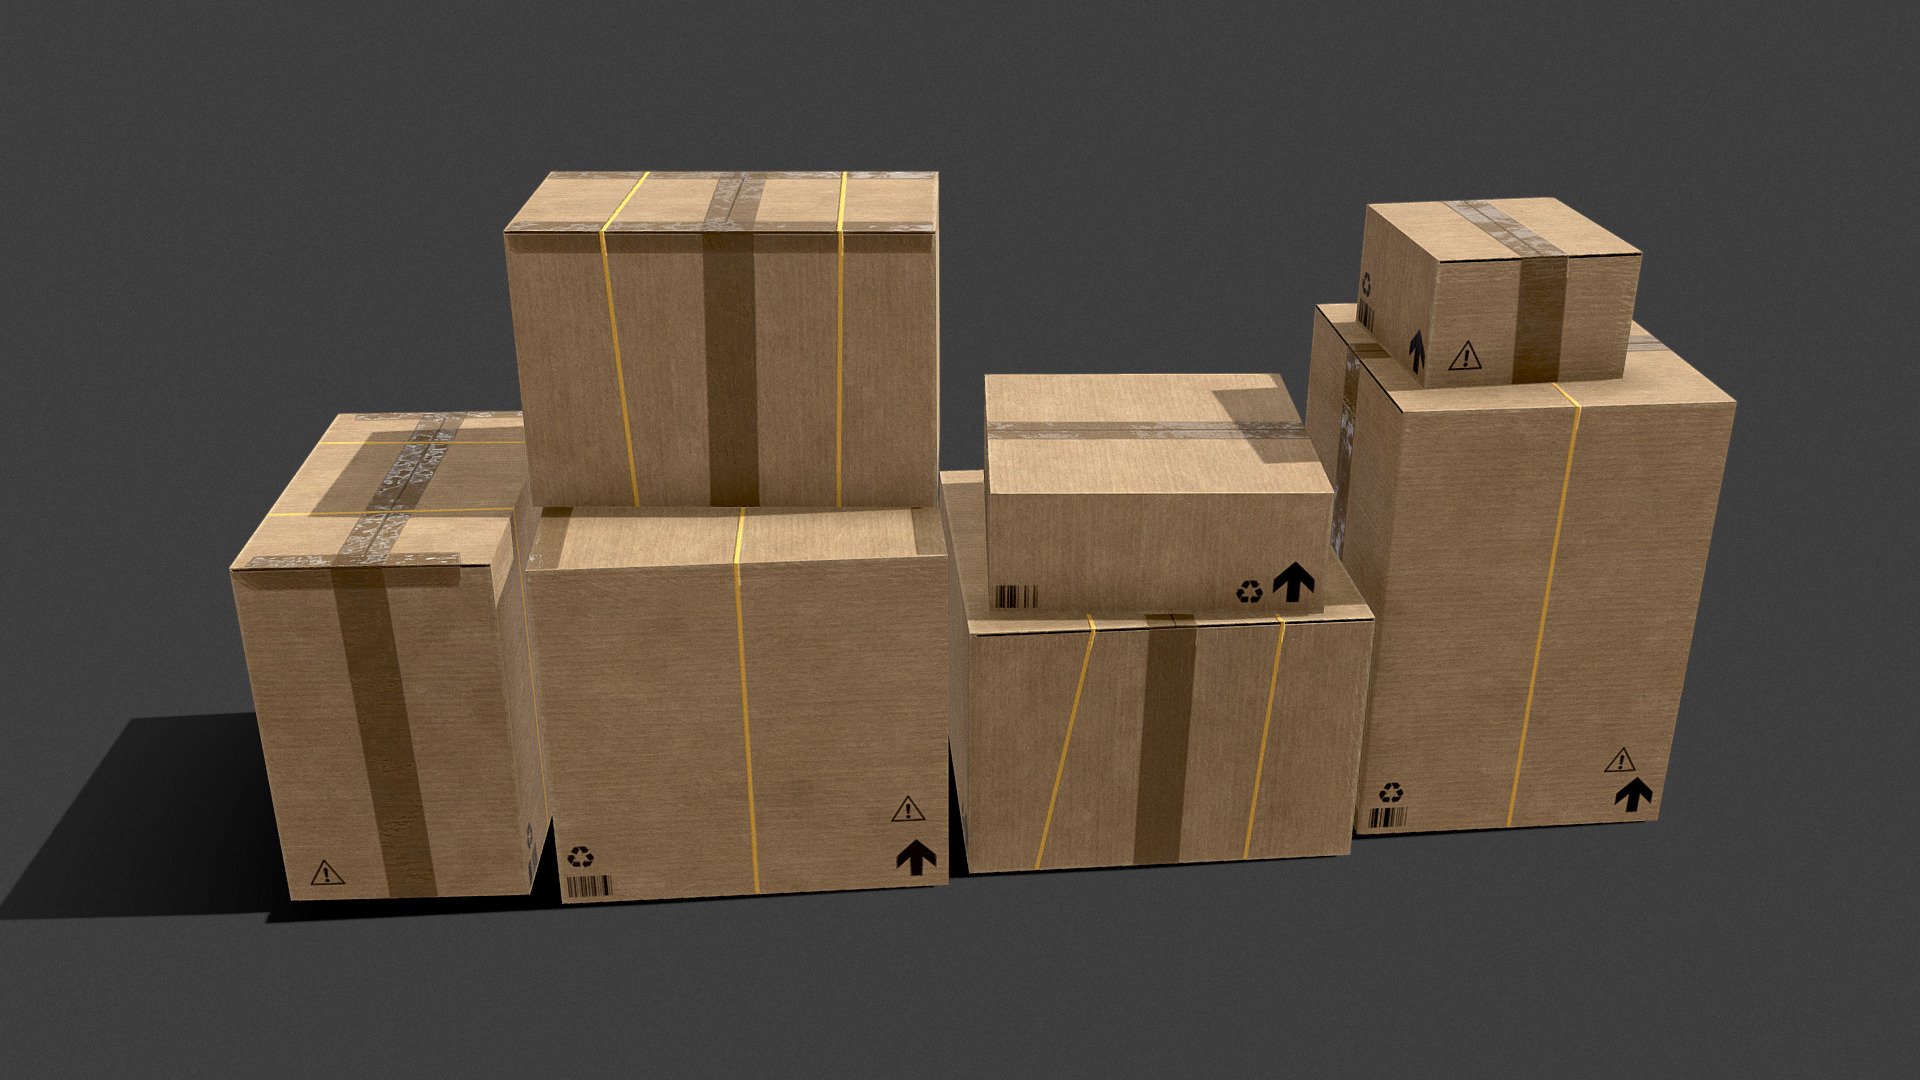 Game ready 3d models set of 7 different shape boxes. Realistic box models are made in blender, textures are made in Substance Painter.

Measurements:


box1: 0.75/ 0.75/ 0.53 m
box2: 0.62/ 0.62/ 0.91 m
box3: 0.73/ 0.73/ 0.70 m
box4: 0.62/ 0.62/ 0.24 m
box5: 0.75/ 0.42/ 0.53 m
box6: 0.45/ 0.73/ 0.70 m
box7: 0.39/ 0.39/ 0.24 m
Vertices: 56
Tris: 78 ( = 42 Quads)

Attached ZIP includes:


FBX
OBJ
textures (diffuse color map/ roughness map/ normal map/ ambient occlusion map/ metallic map)
 - Boxes - Buy Royalty Free 3D model by hectopod 3d model